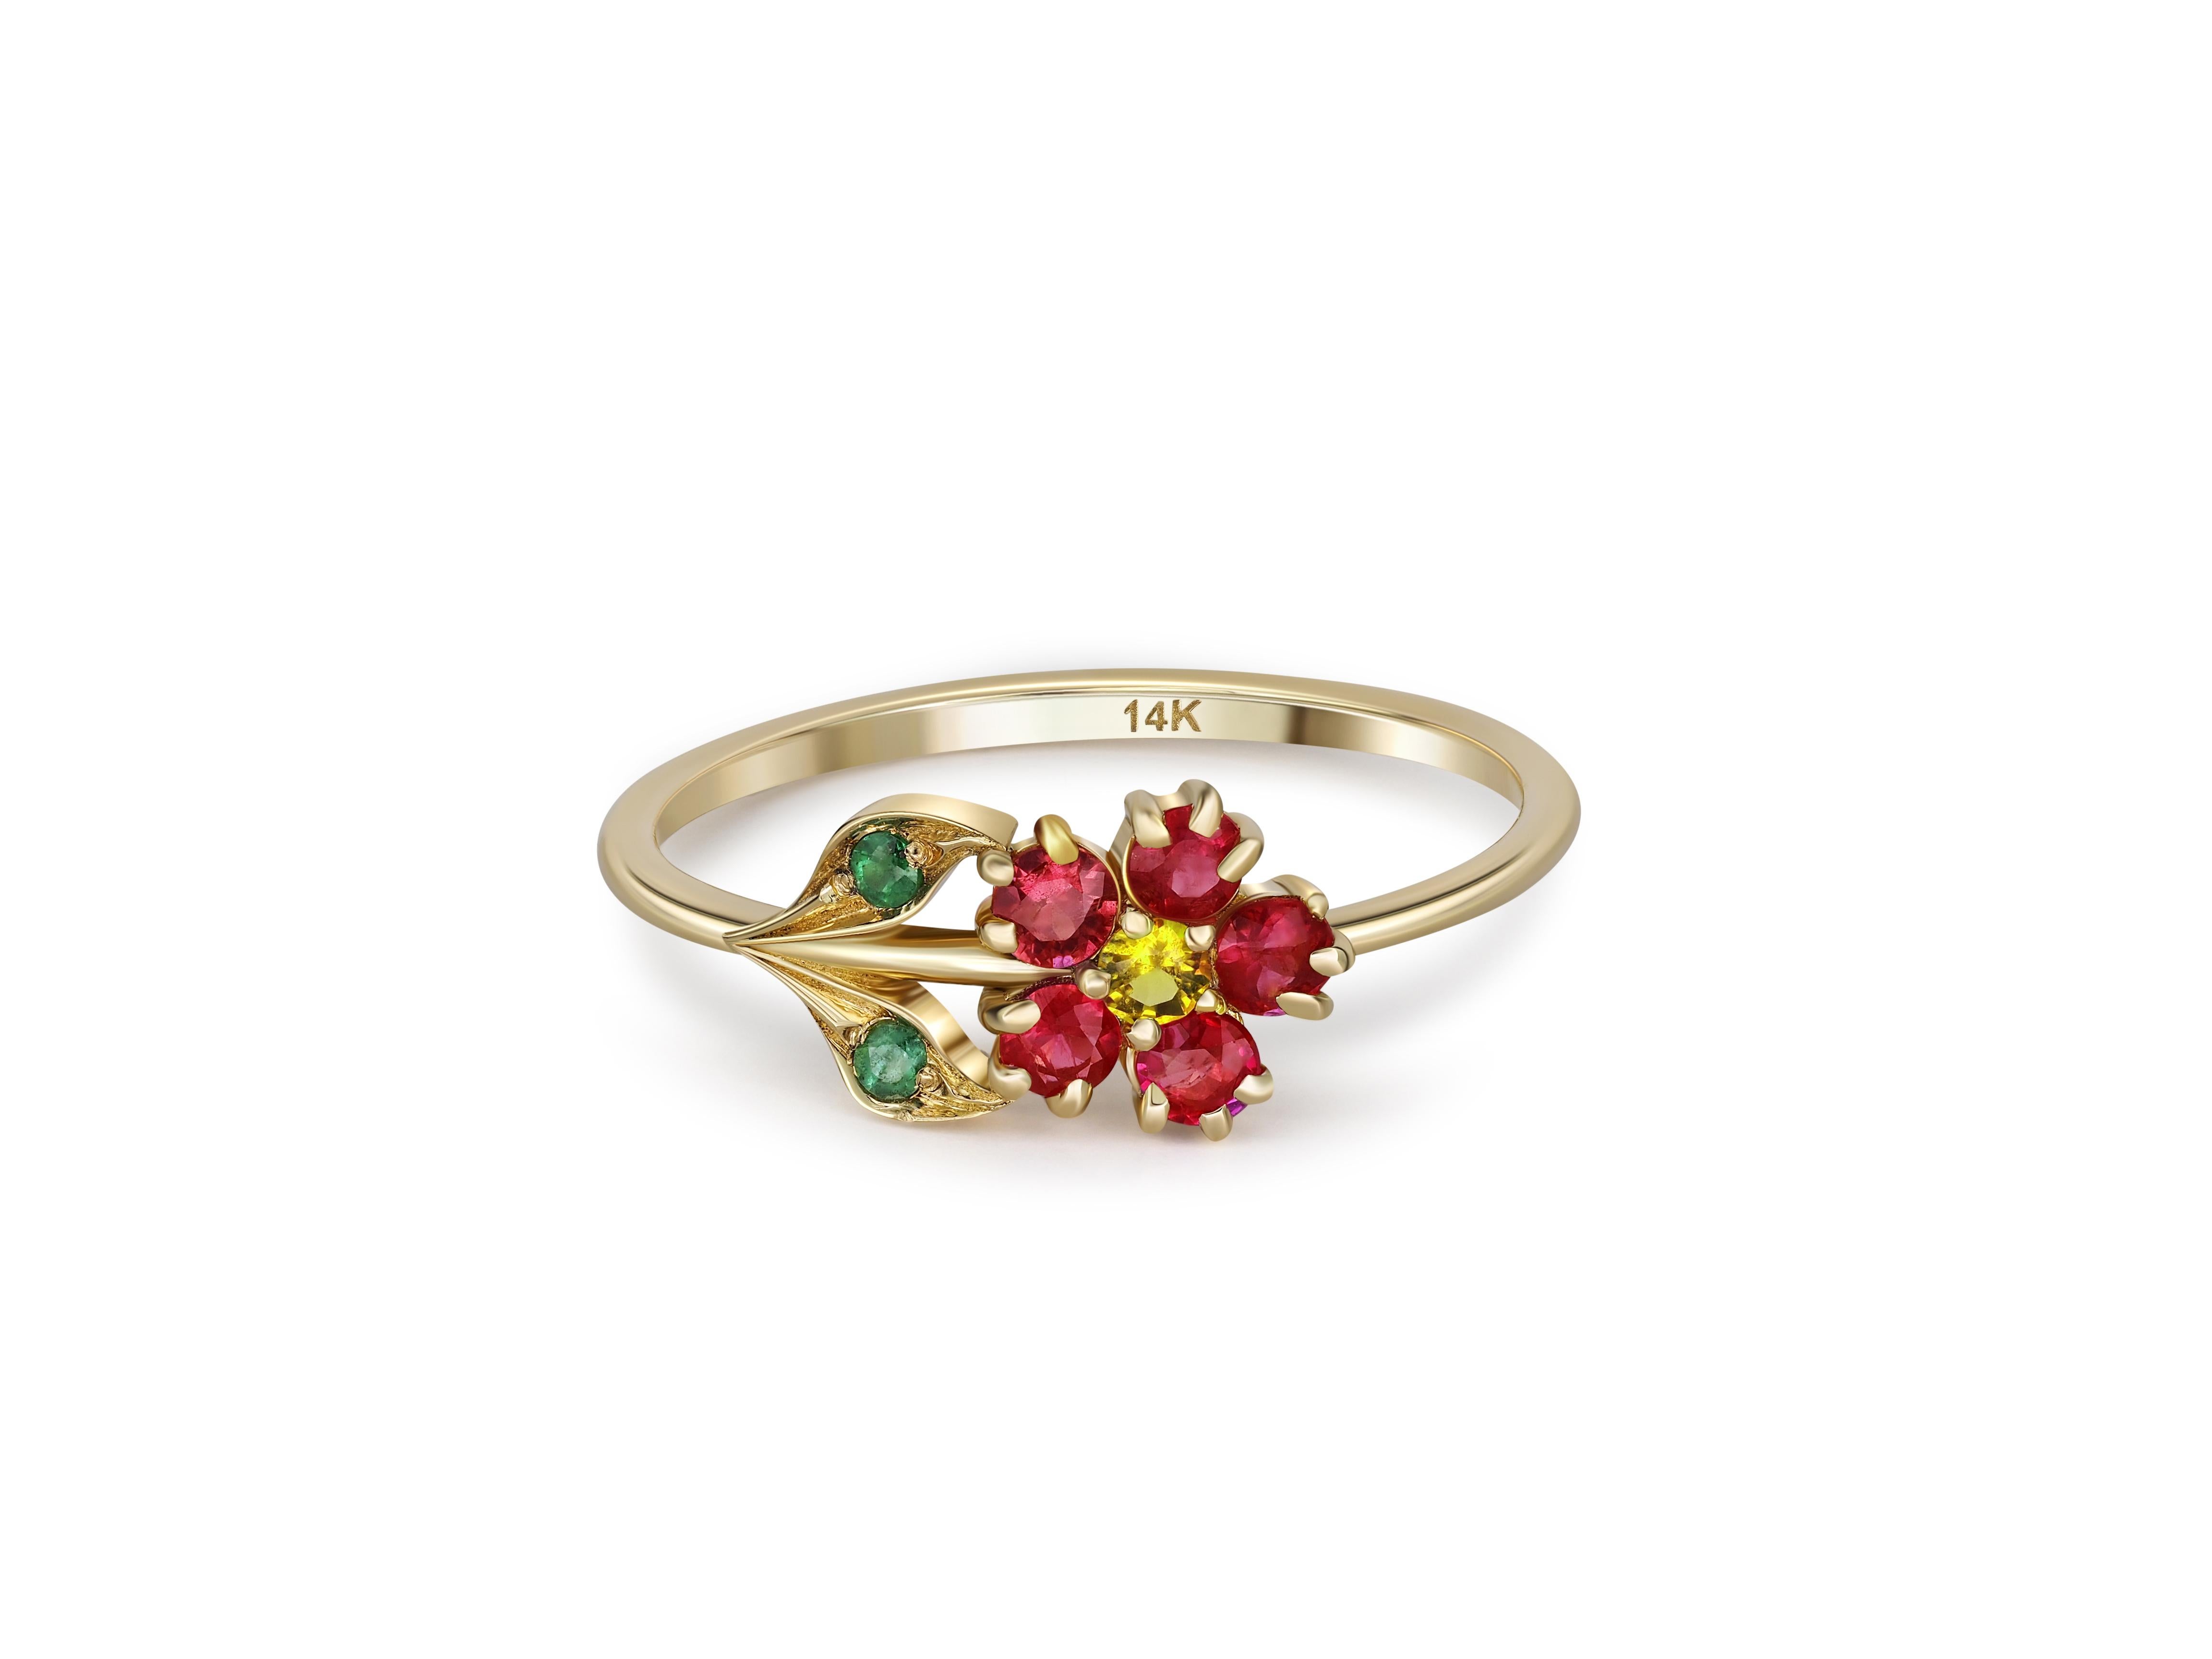 For Sale:  Flower Ring in 14 Karat Gold, Sapphire, Garnet and Chrome Diopsides Ring 2